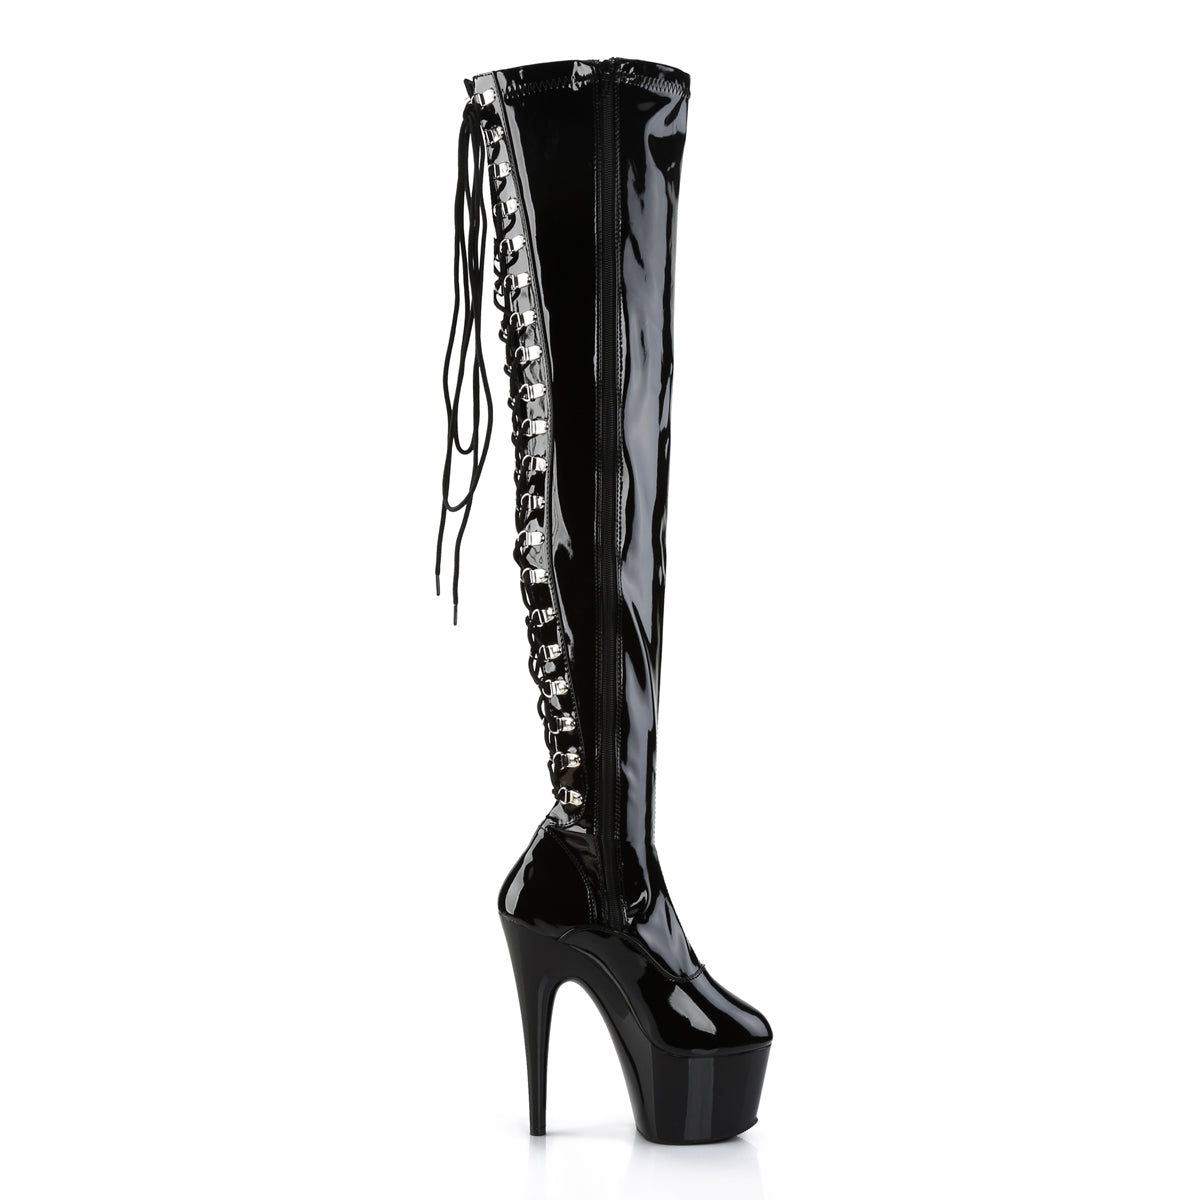 ADORE-3063 7" Black Stretch Patent Pole Dancer Kinky Boots-Pleaser- Sexy Shoes Fetish Heels